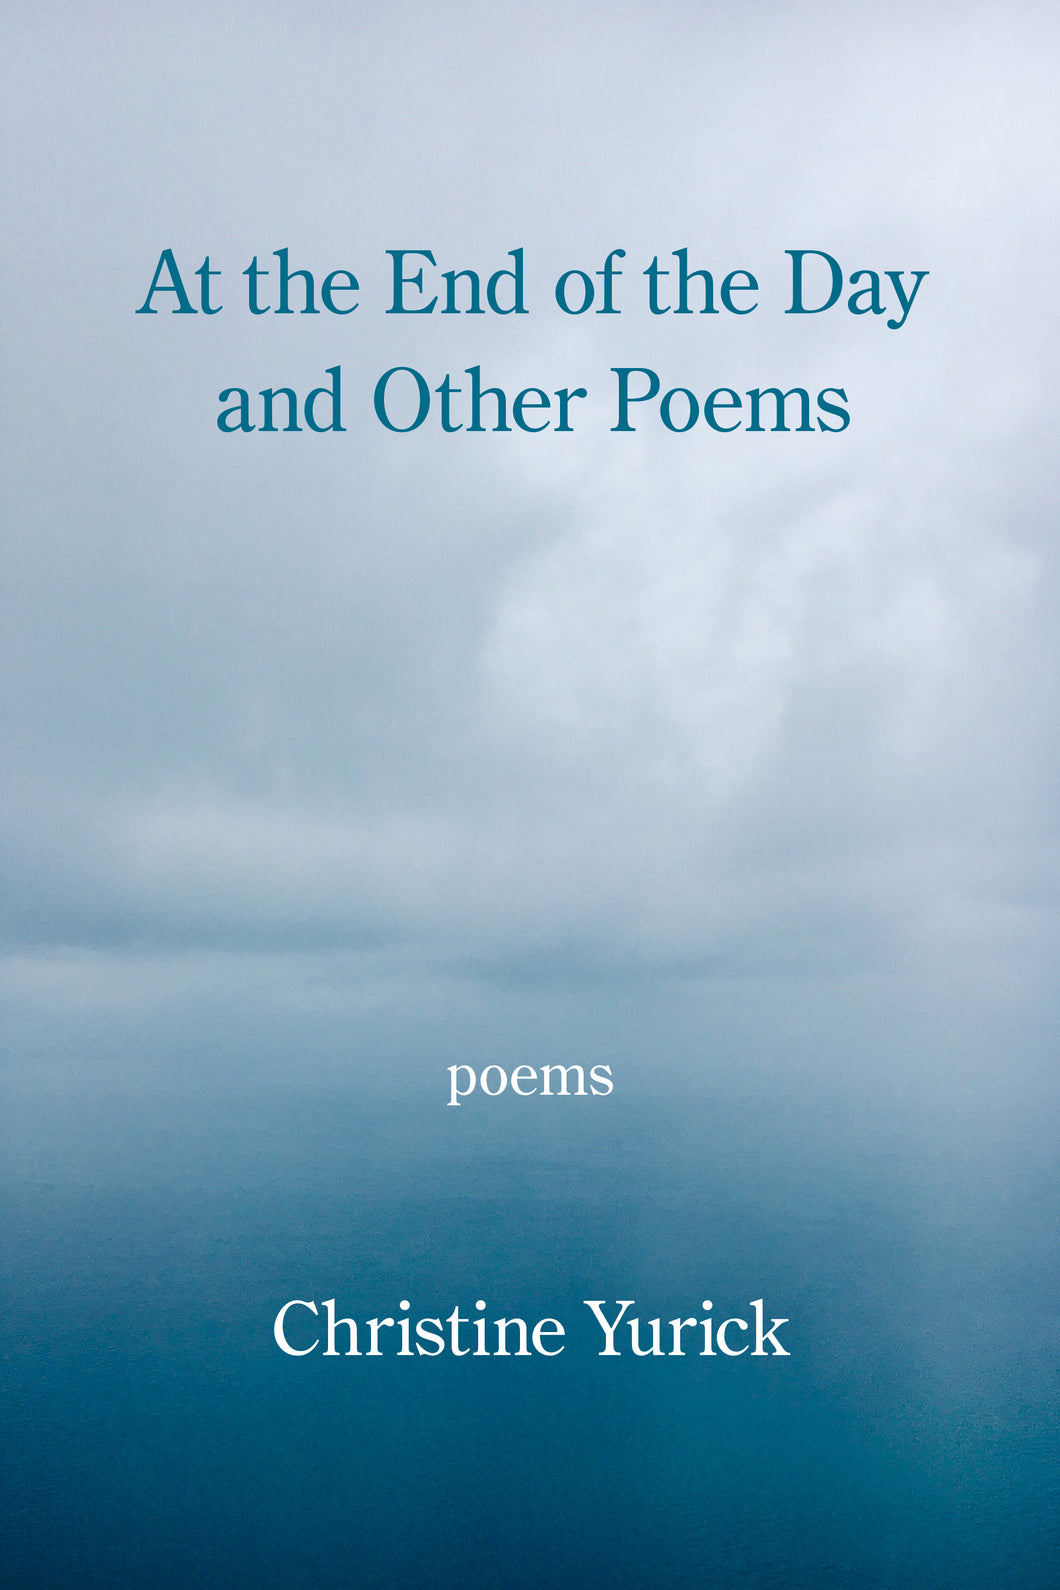 At the End of the Day and Other Poems